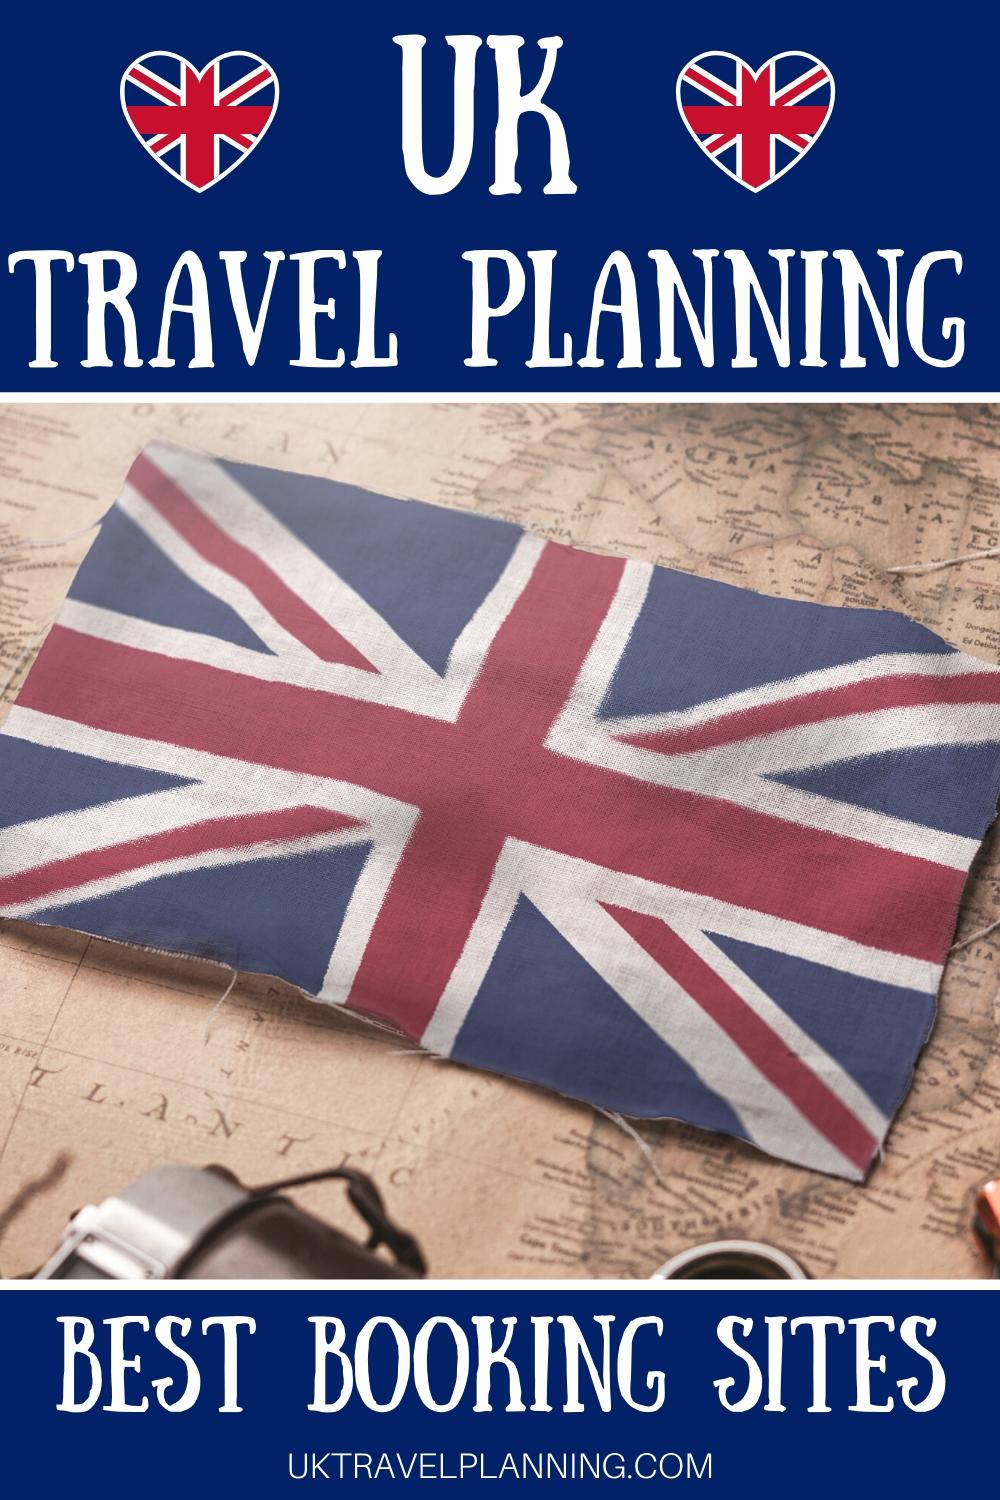 Best booking sites for UK travel